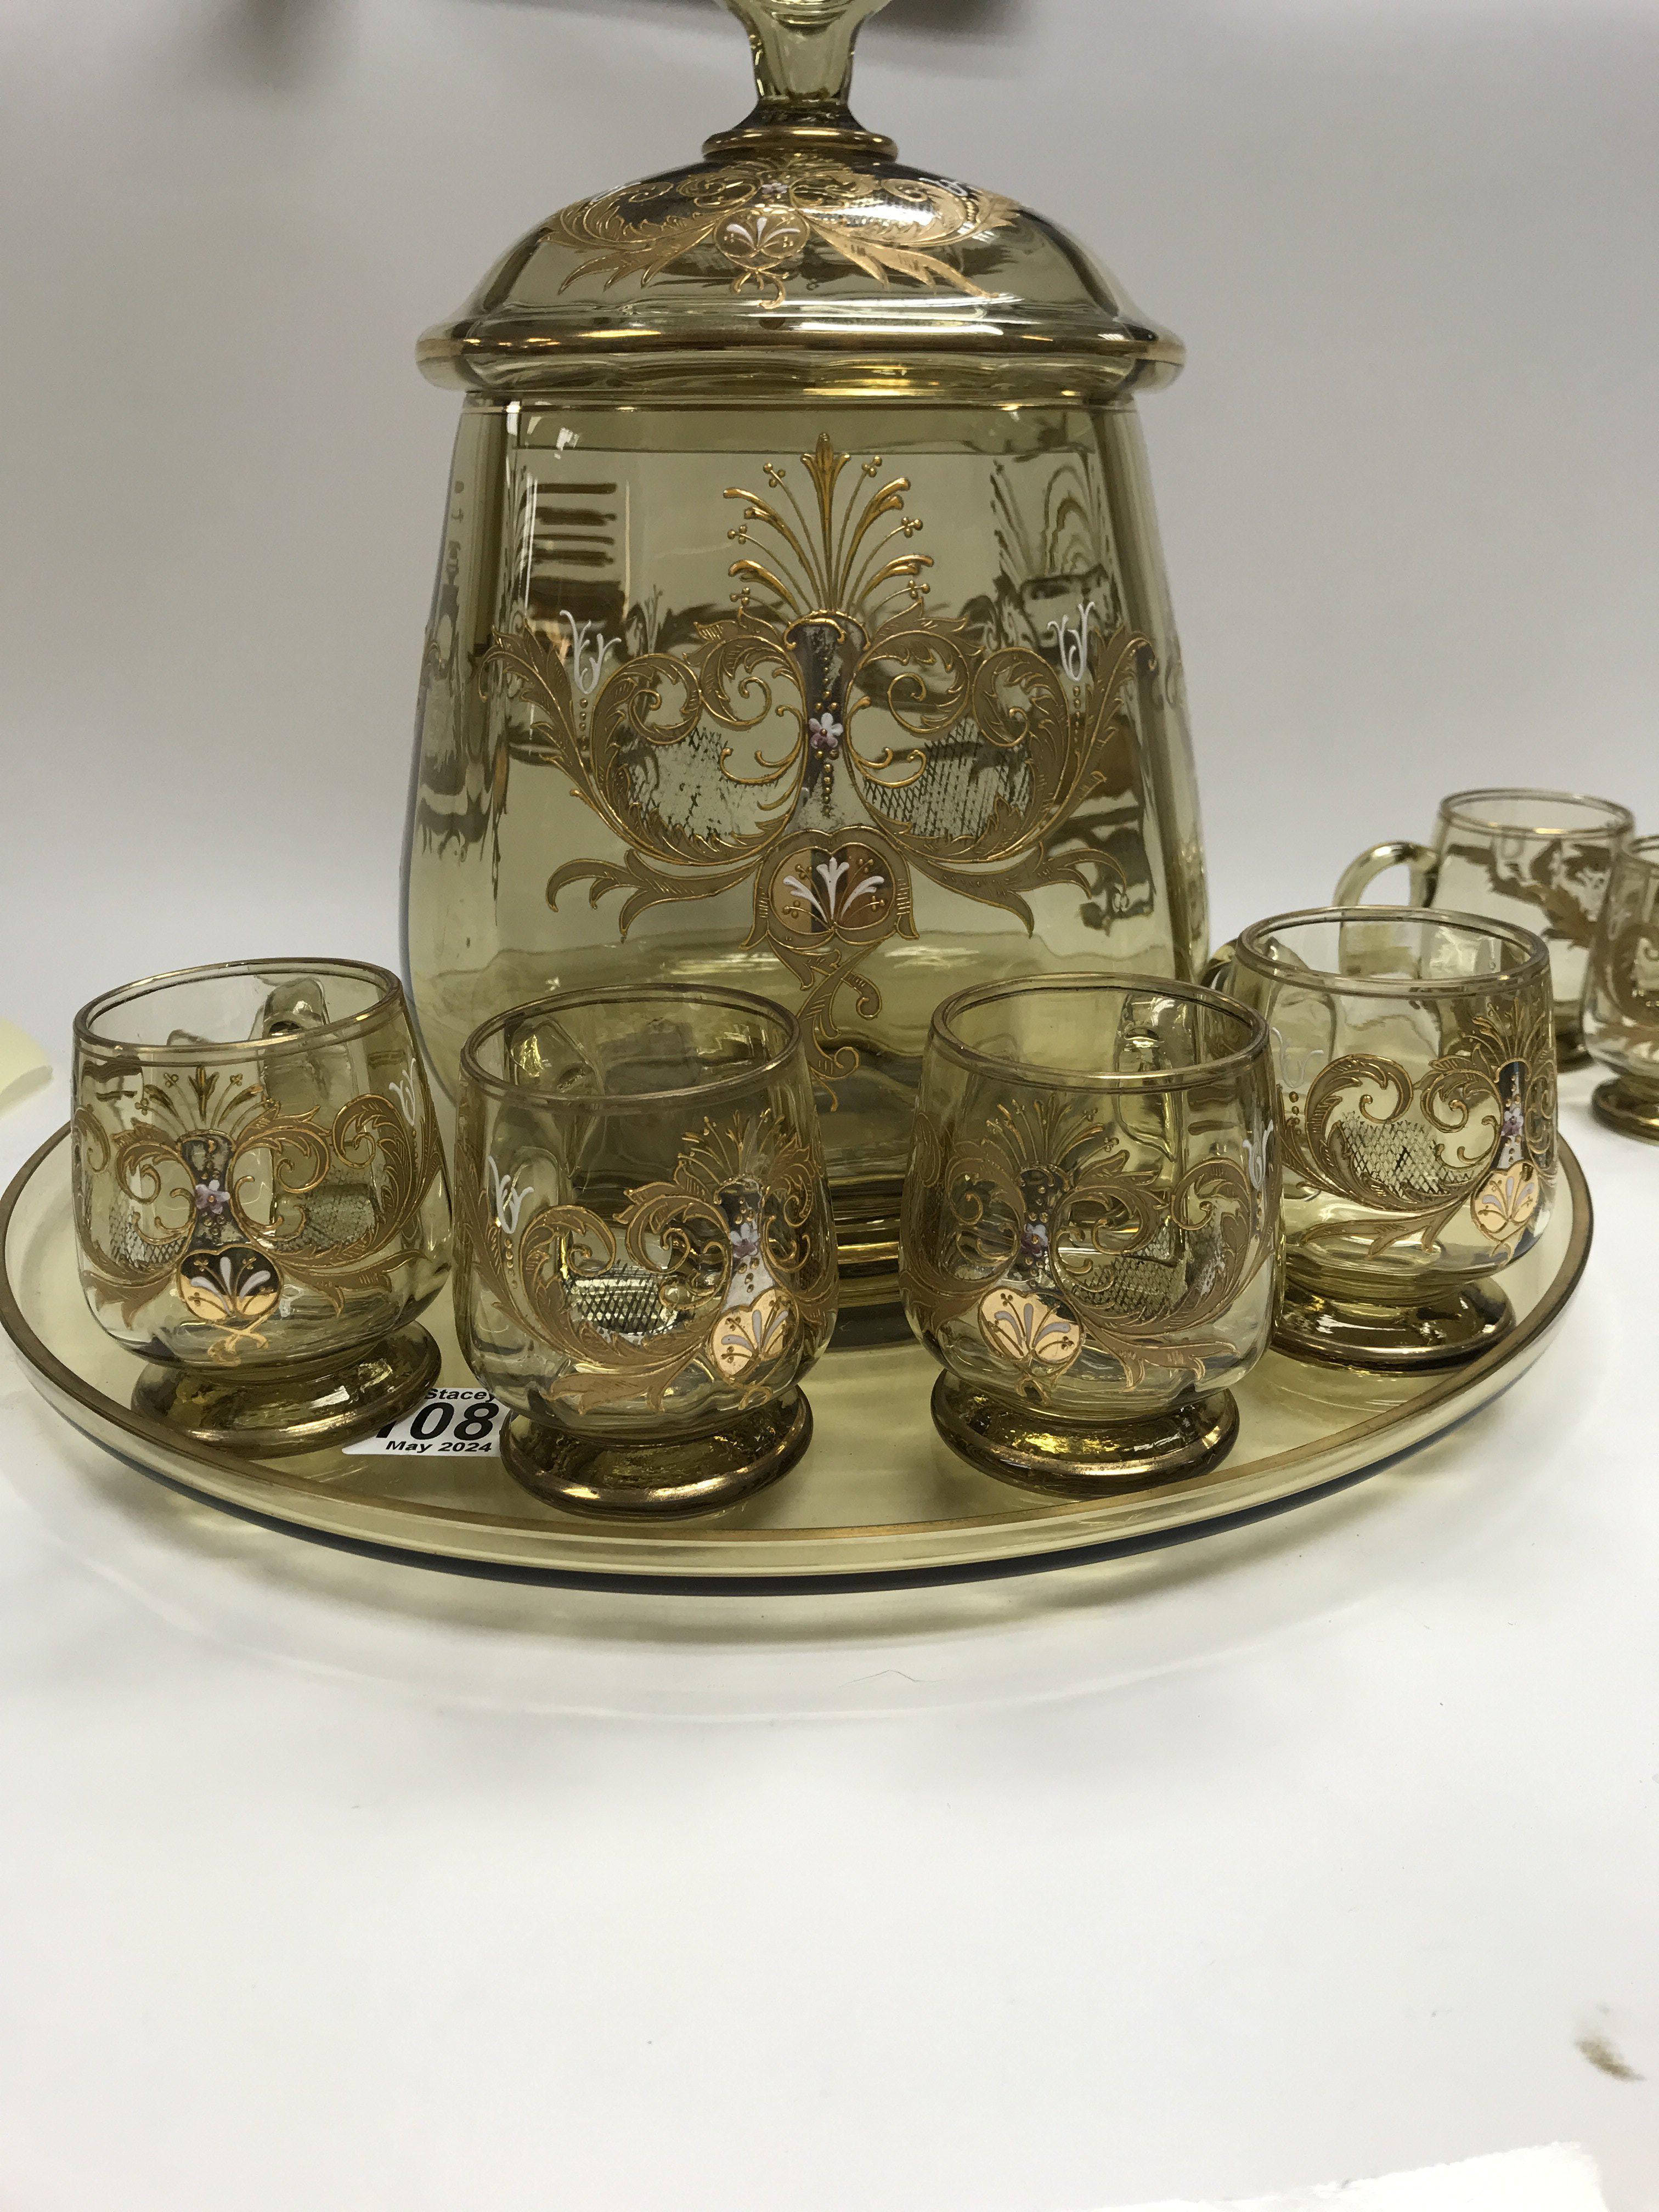 A Bohemian glass punch bowl set with floral gilt d - Image 3 of 4